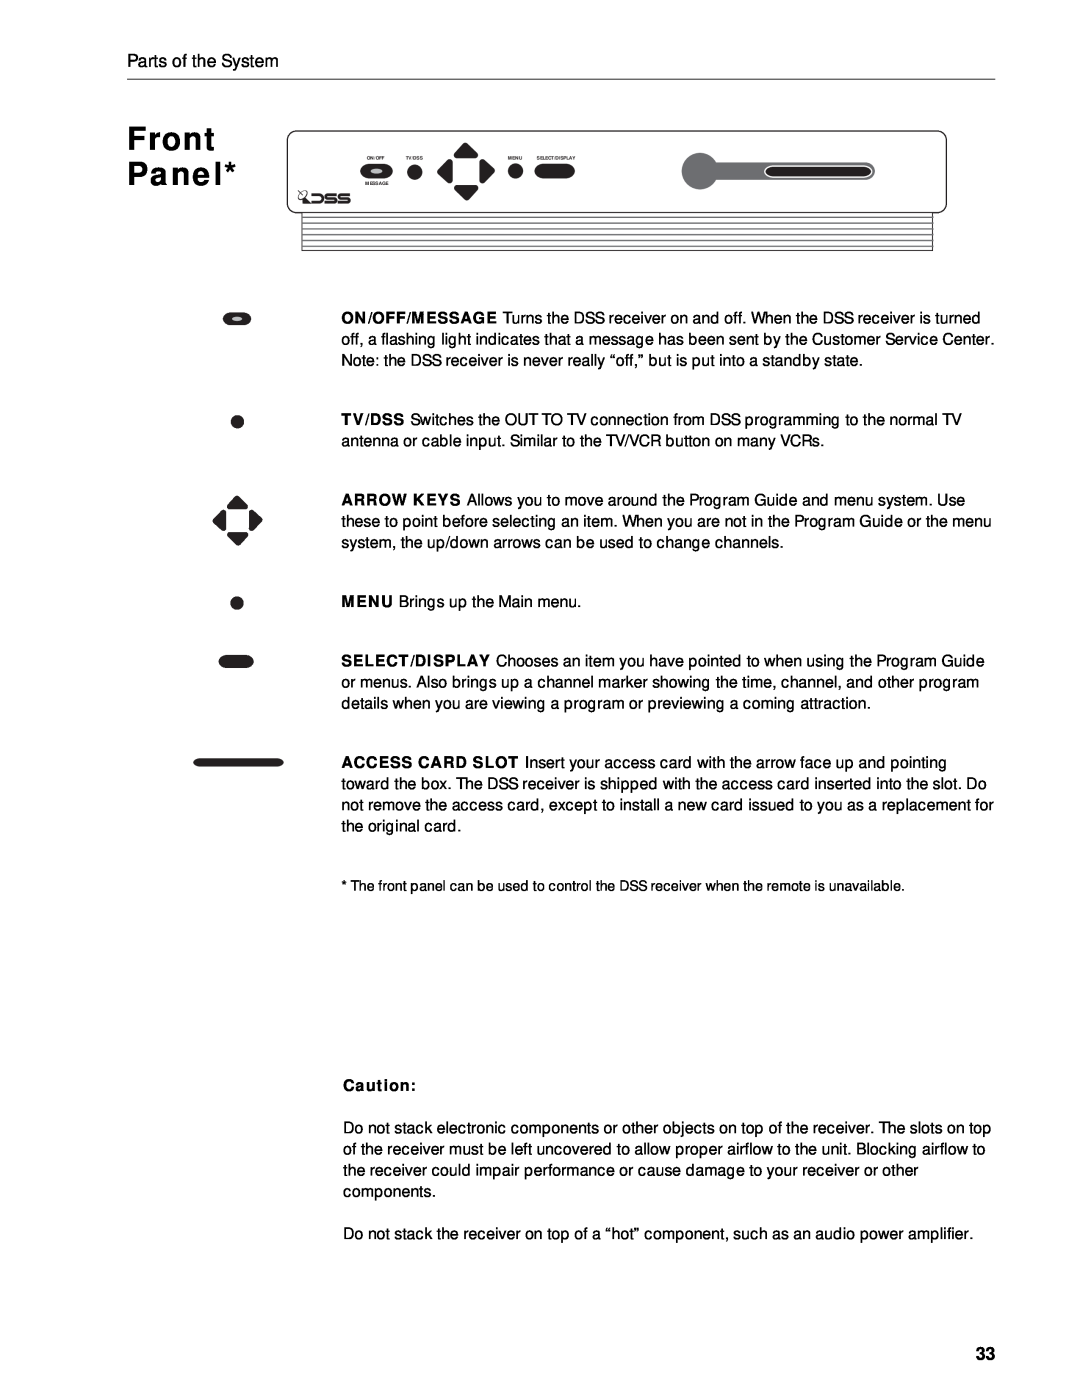 RCA DRD212NW user manual Front Panel, Parts of the System 